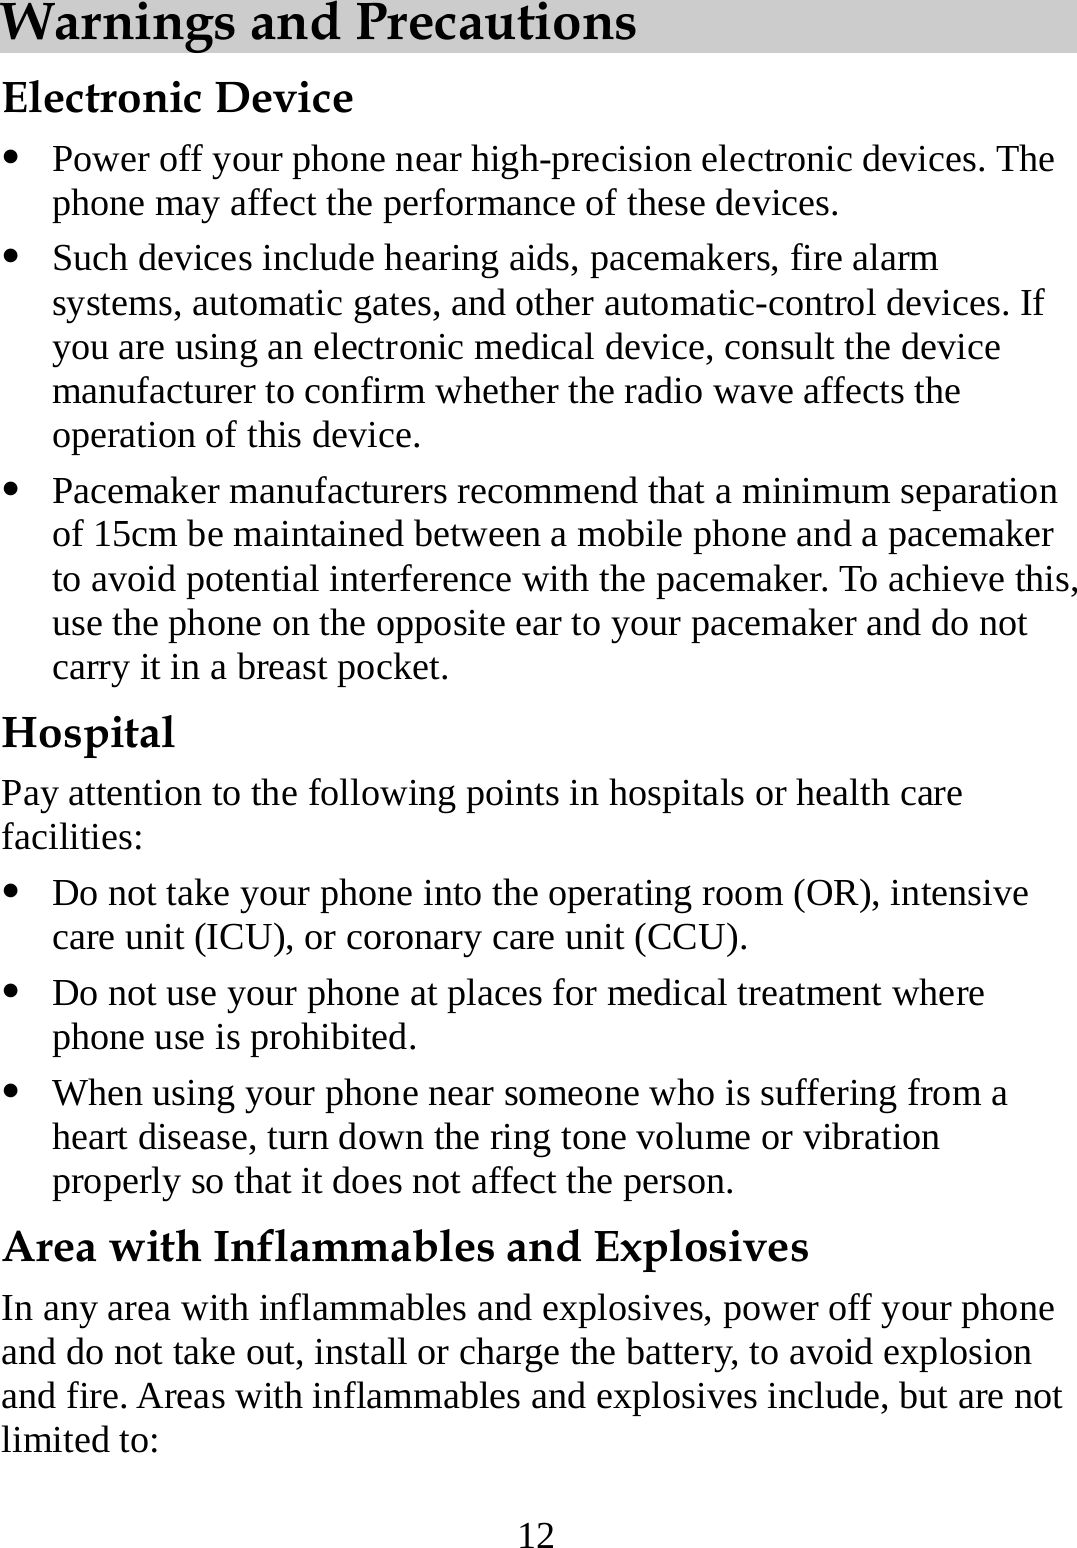 12 Warnings and Precautions   Electronic Device z Power off your phone near high-precision electronic devices. The phone may affect the performance of these devices. z Such devices include hearing aids, pacemakers, fire alarm systems, automatic gates, and other automatic-control devices. If you are using an electronic medical device, consult the device manufacturer to confirm whether the radio wave affects the operation of this device. z Pacemaker manufacturers recommend that a minimum separation of 15cm be maintained between a mobile phone and a pacemaker to avoid potential interference with the pacemaker. To achieve this, use the phone on the opposite ear to your pacemaker and do not carry it in a breast pocket. Hospital Pay attention to the following points in hospitals or health care facilities: z Do not take your phone into the operating room (OR), intensive care unit (ICU), or coronary care unit (CCU). z Do not use your phone at places for medical treatment where phone use is prohibited. z When using your phone near someone who is suffering from a heart disease, turn down the ring tone volume or vibration properly so that it does not affect the person. Area with Inflammables and Explosives In any area with inflammables and explosives, power off your phone and do not take out, install or charge the battery, to avoid explosion and fire. Areas with inflammables and explosives include, but are not limited to: 